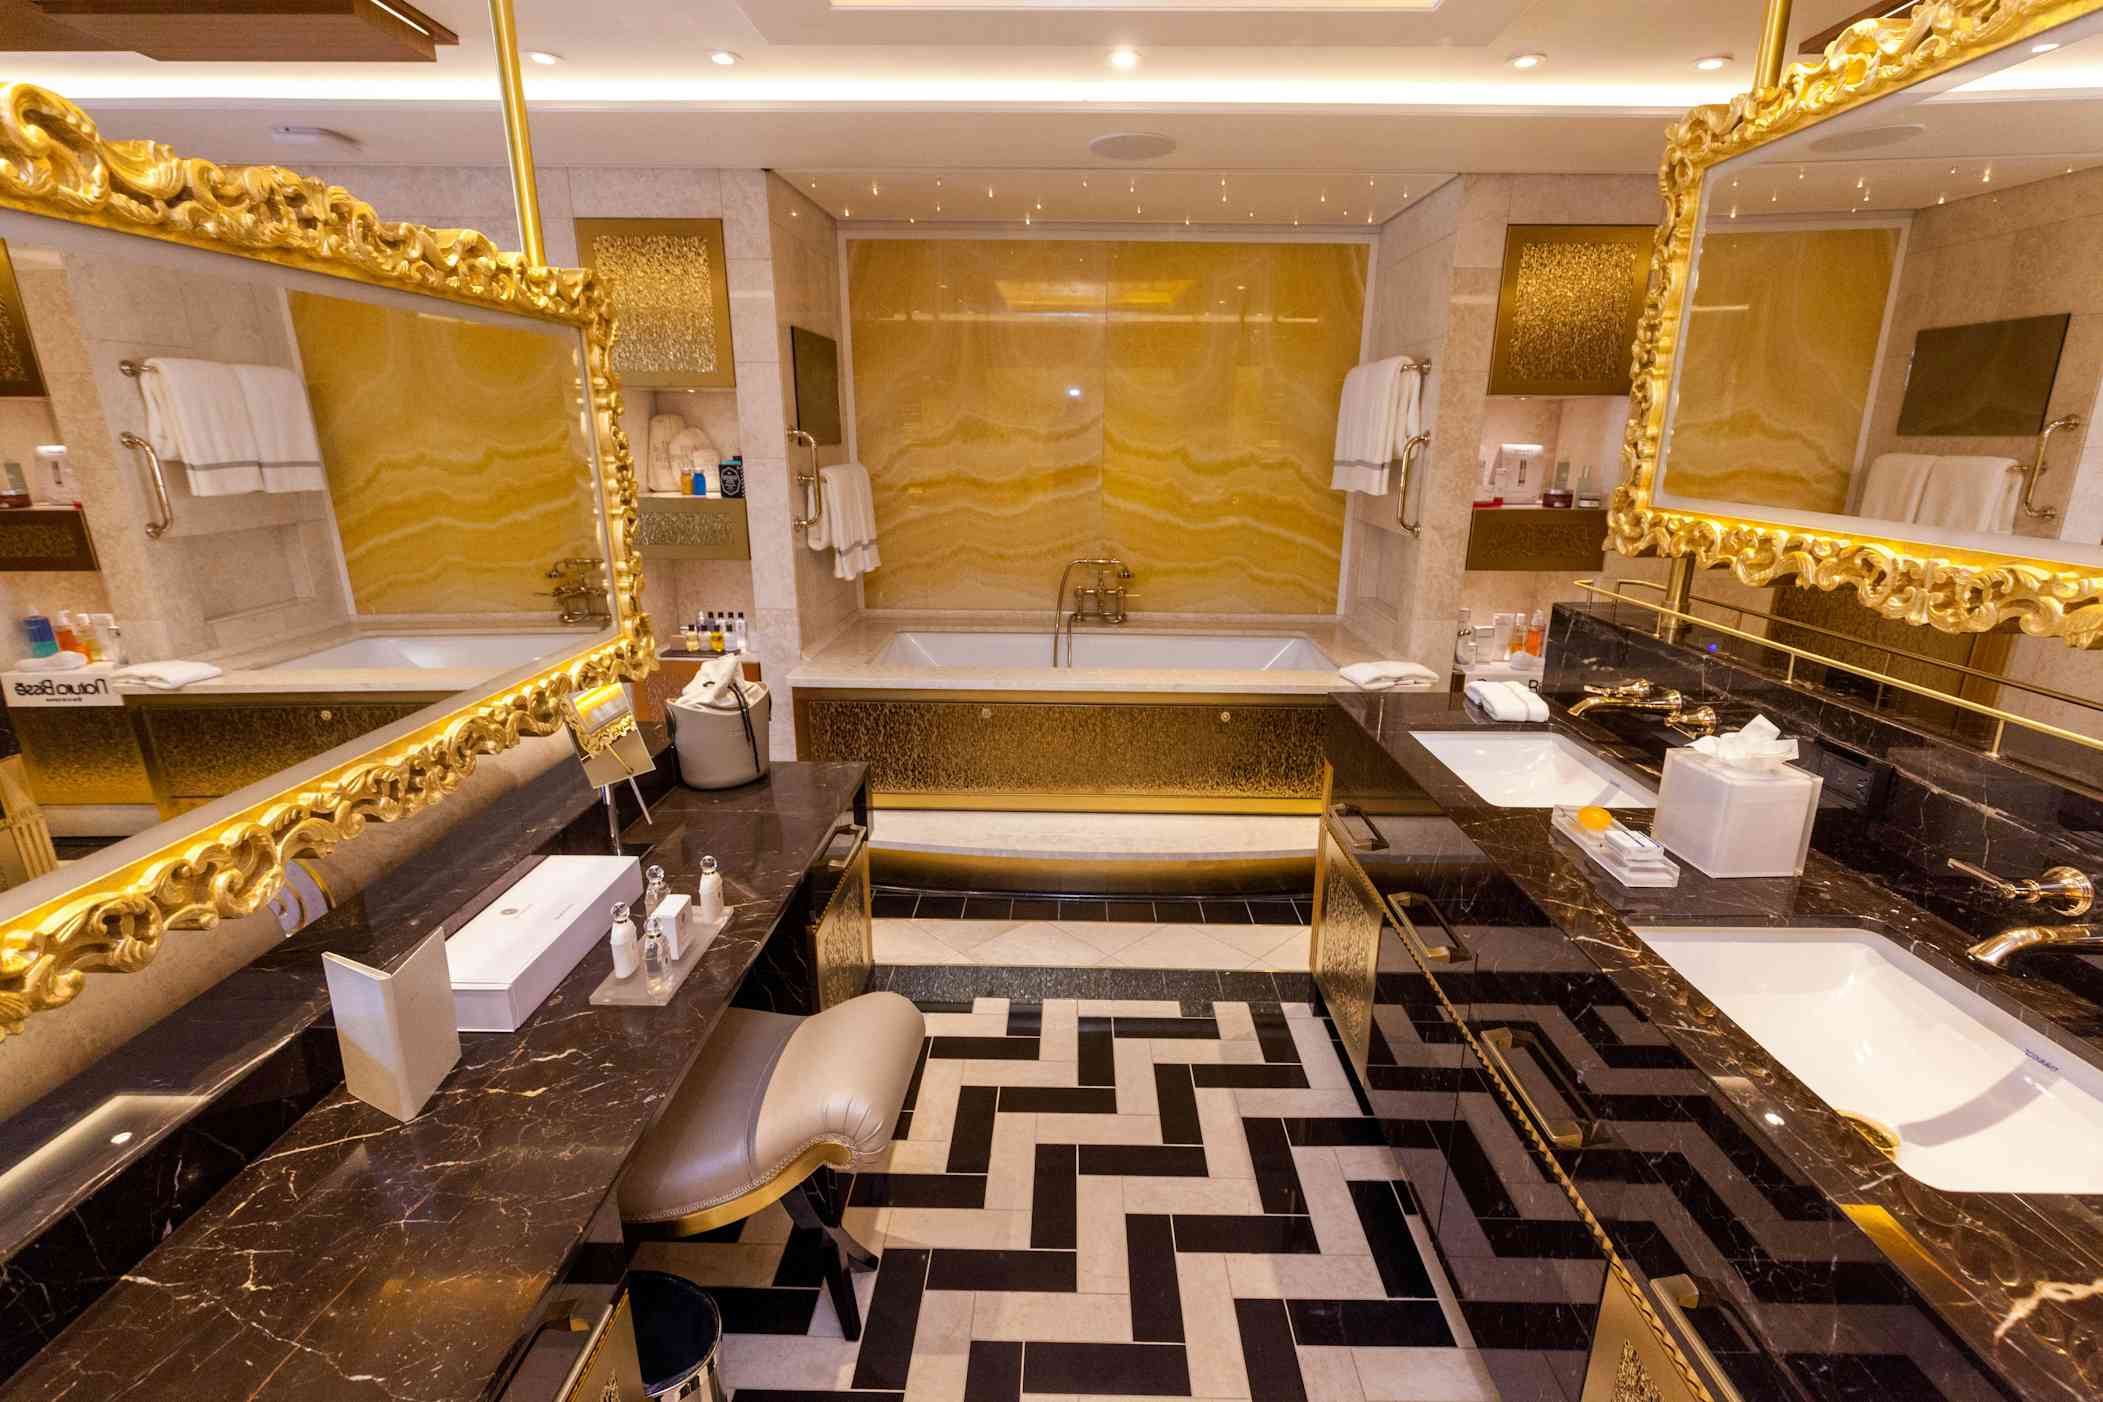 Luxury Hotel Baths You'll Never Want To Leave